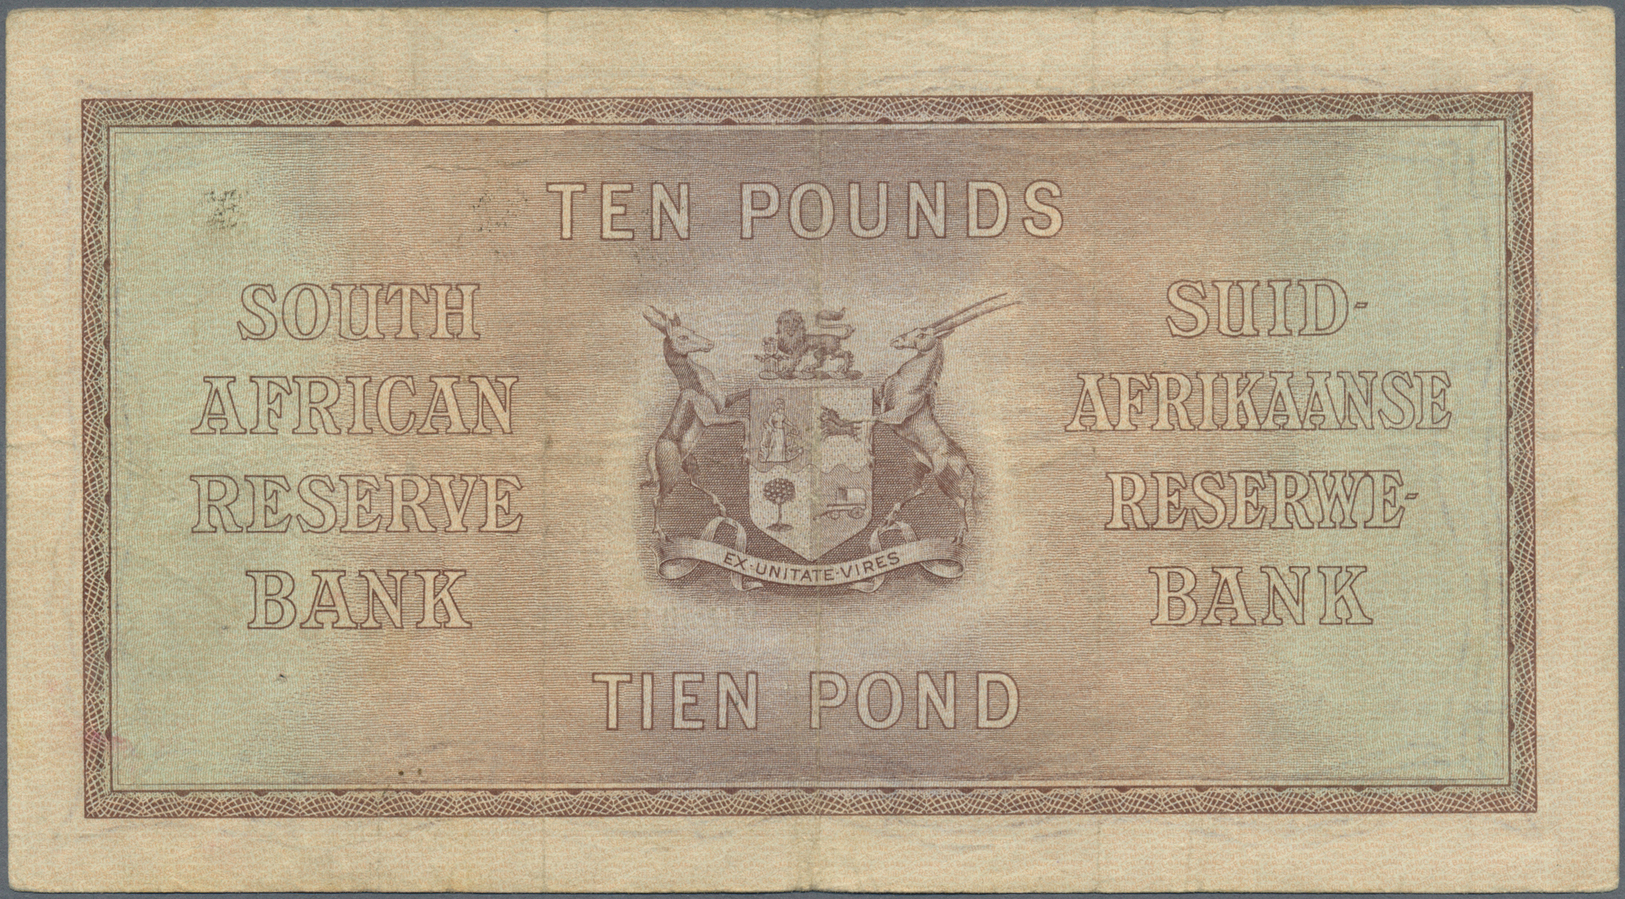 02951 South Africa / Südafrika: 10 POunds 1943 P. 87, Used With Folds And Pinholes, No Tears, Still Strongness In Paper - Afrique Du Sud